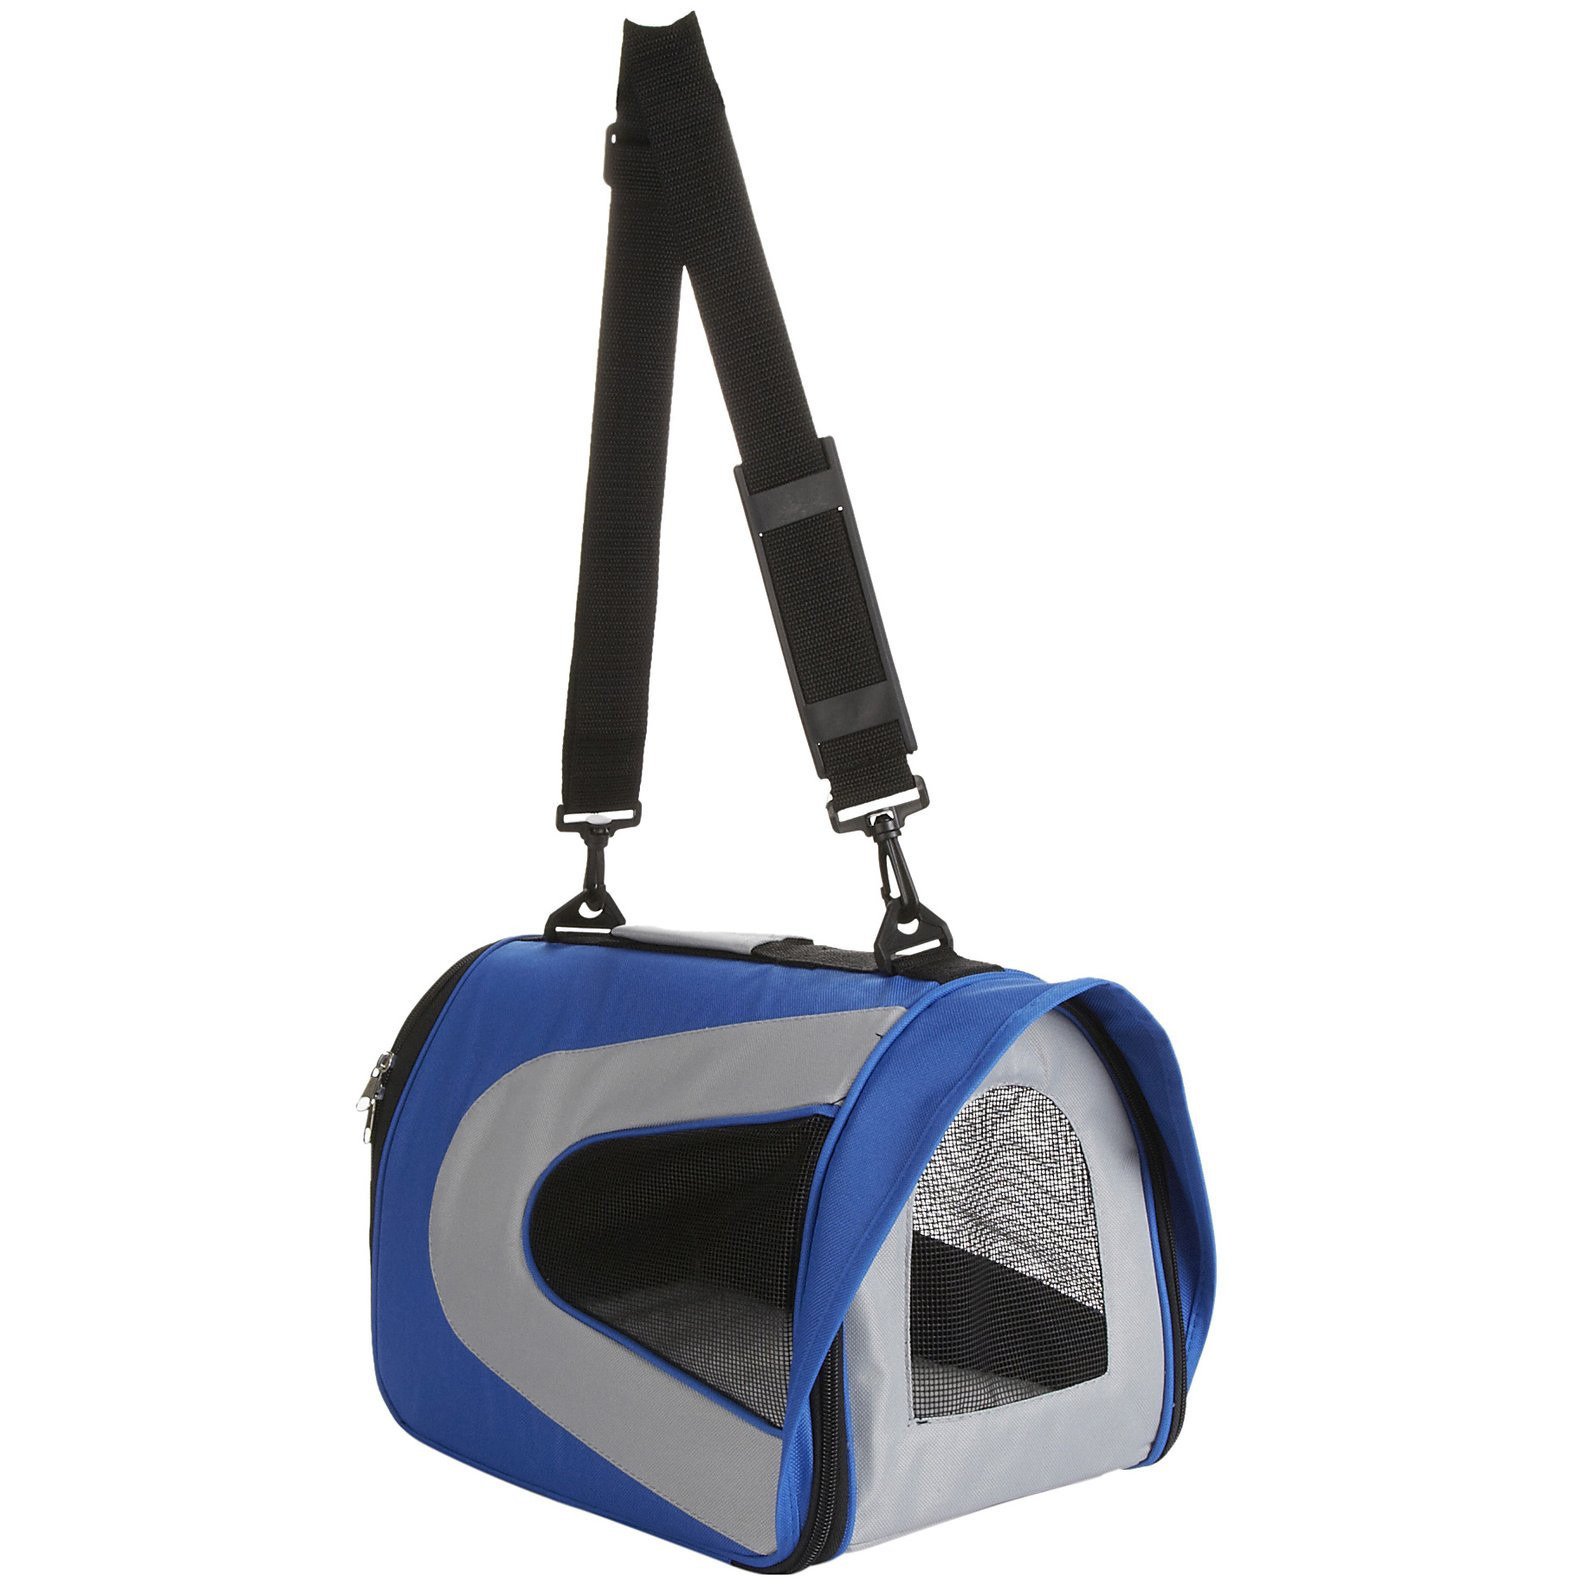 Airline Approved Folding Zippered Sporty Mesh Pet Carrier - Blue